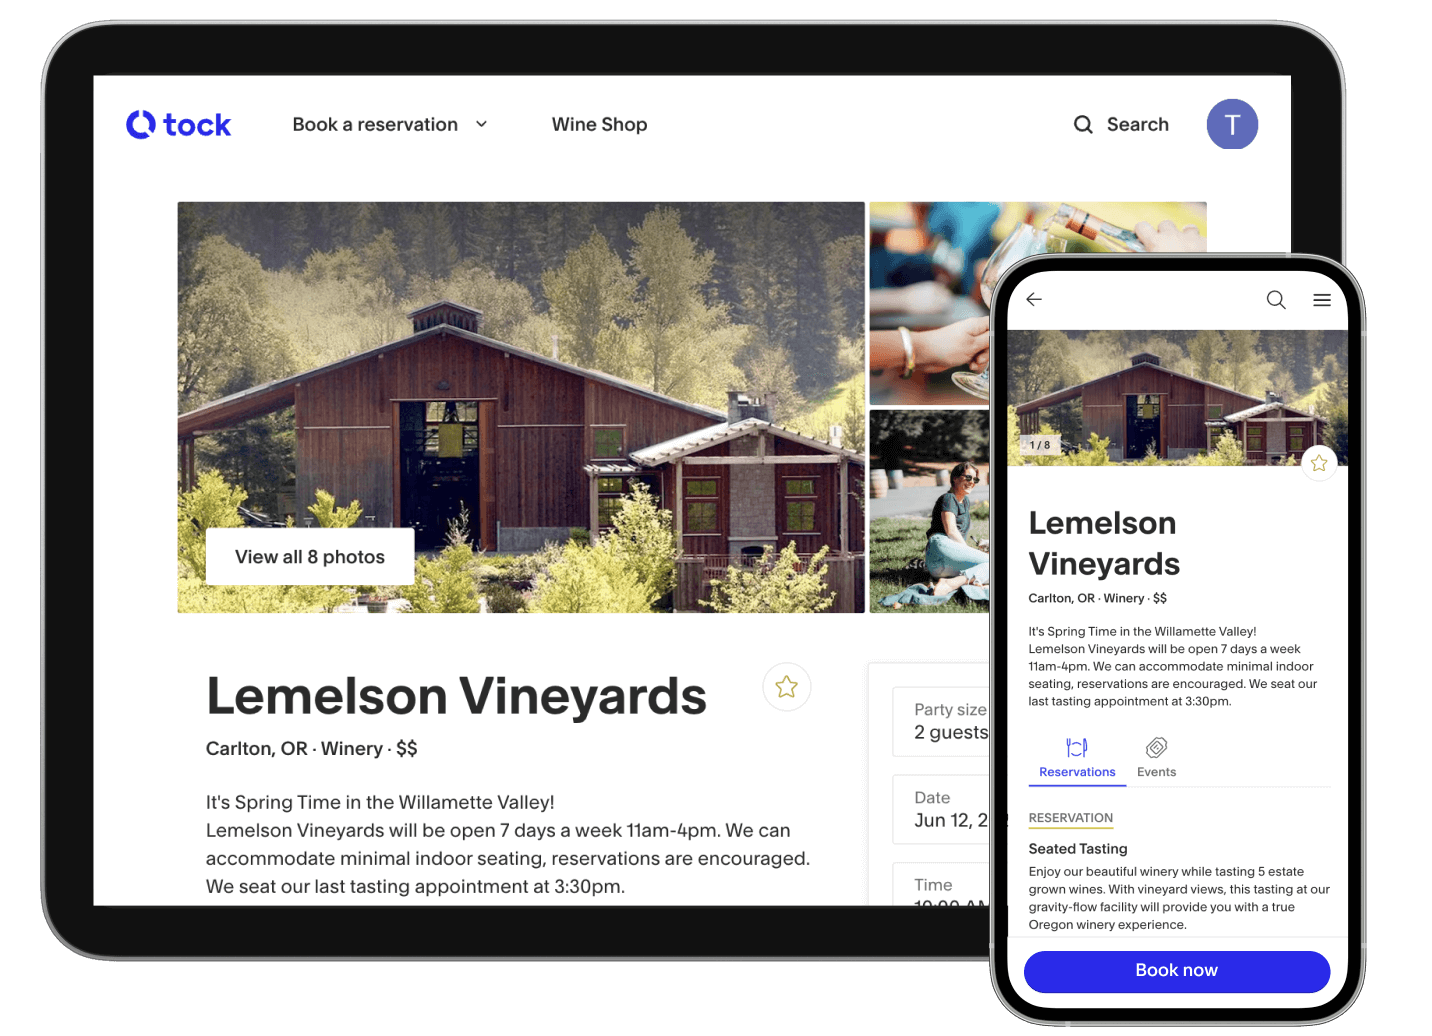 Lemelson Vineyards Tock business page is displayed in a tablet as well as a mobile phone that is layered on top of the tablet. An image of a barn is displayed on the business page along with a description that reads, “It's Spring Time in the Willamette Valley!Lemelson Vineyards will be open 7 days a week 11am-4pm. We can accommodate minimal indoor seating, reservations are encouraged. We seat our last tasting appointment at 3:30pm”.